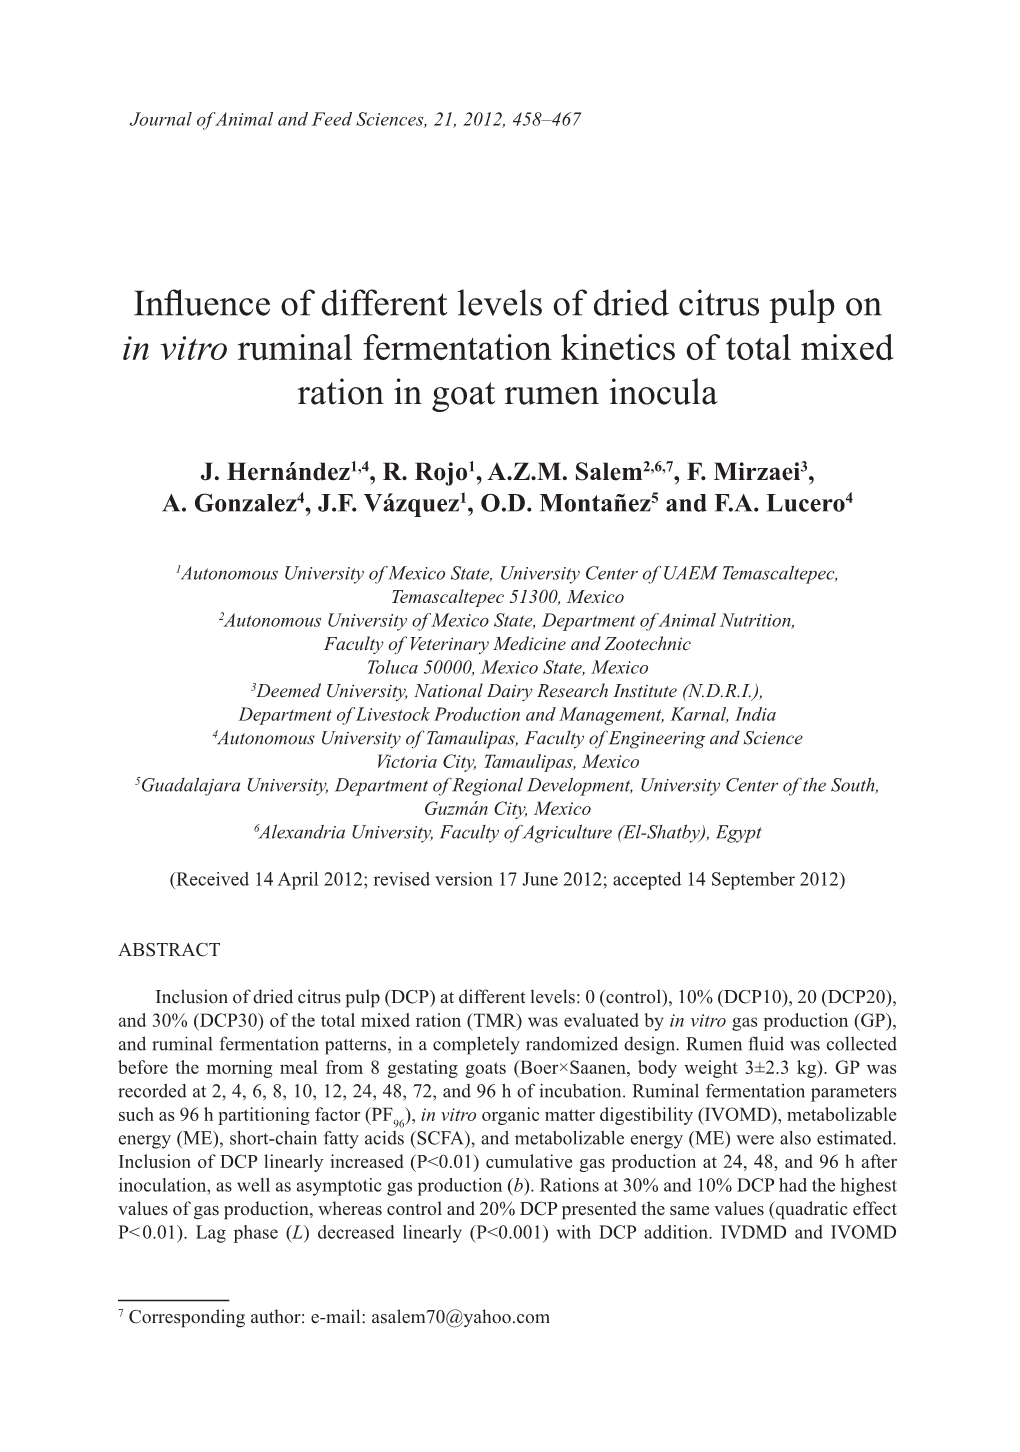 Influence of Different Levels of Dried Citrus Pulp on in Vitro Ruminal Fermentation Kinetics of Total Mixed Ration in Goat Rumen Inocula